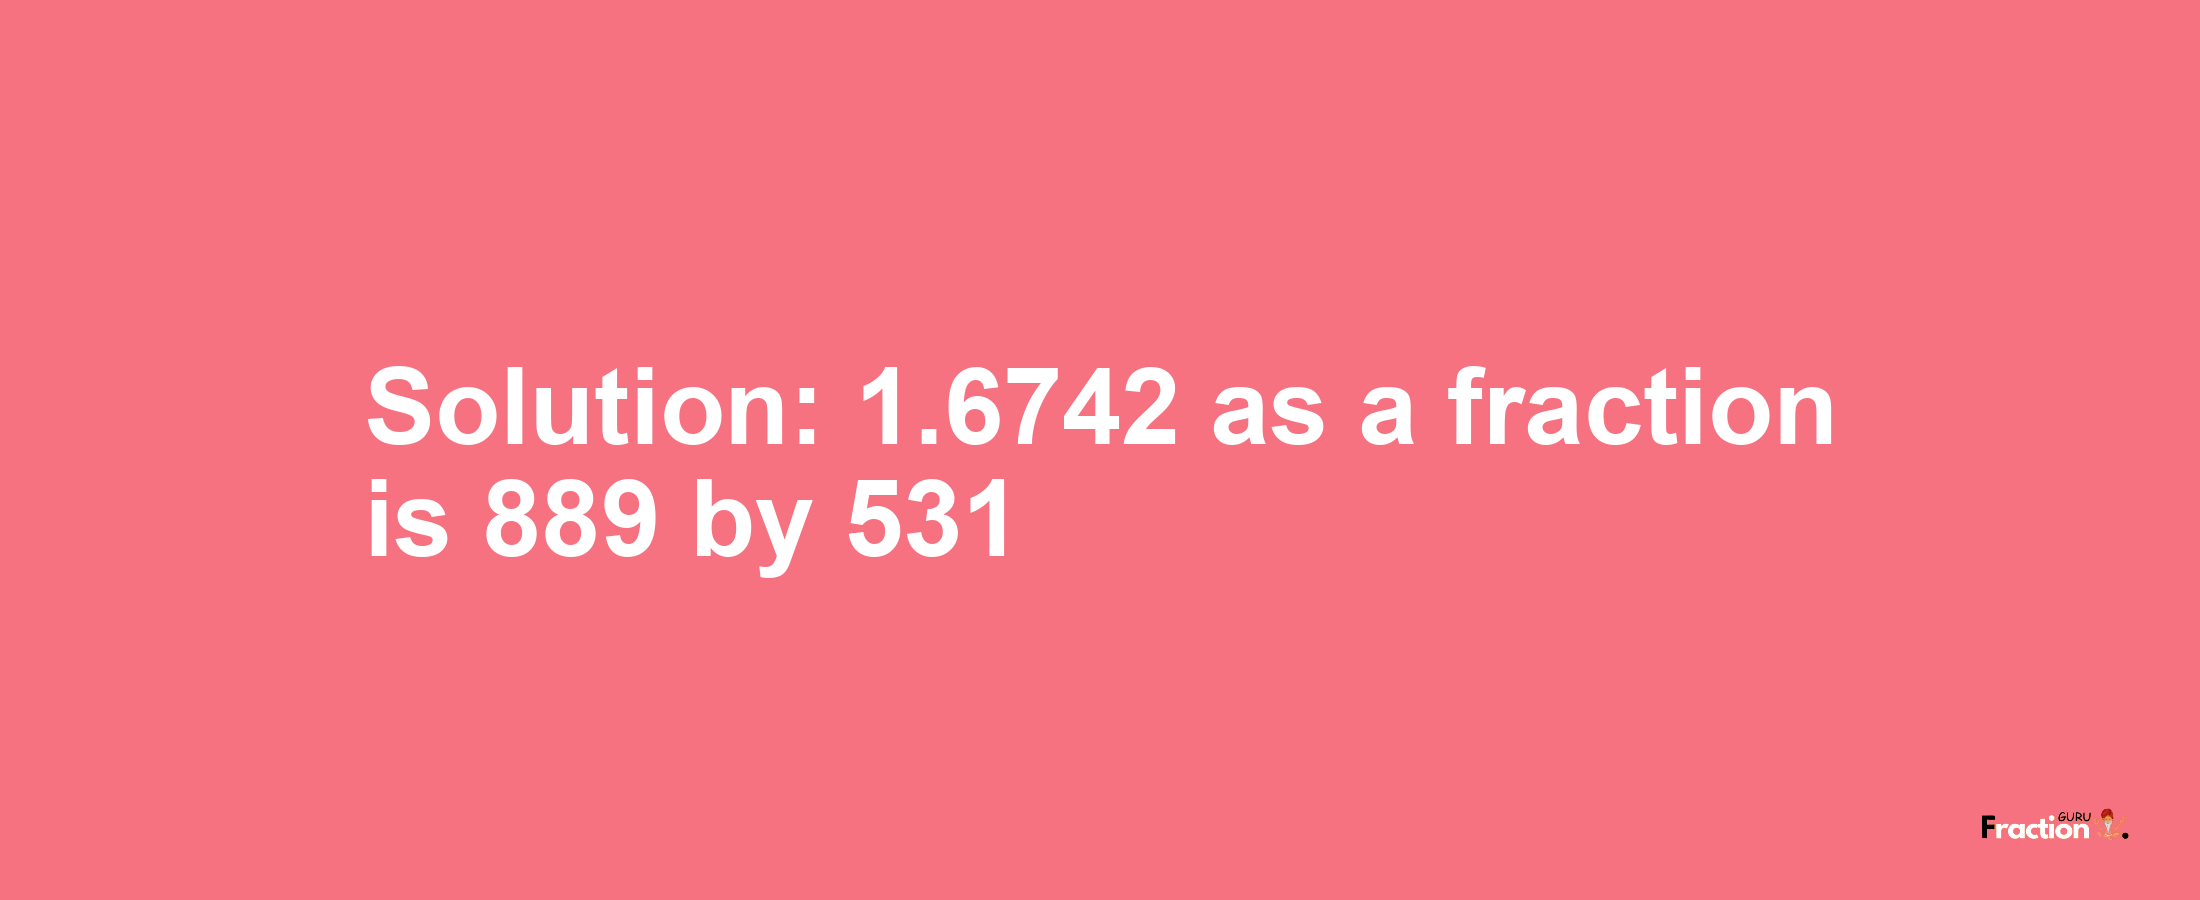 Solution:1.6742 as a fraction is 889/531